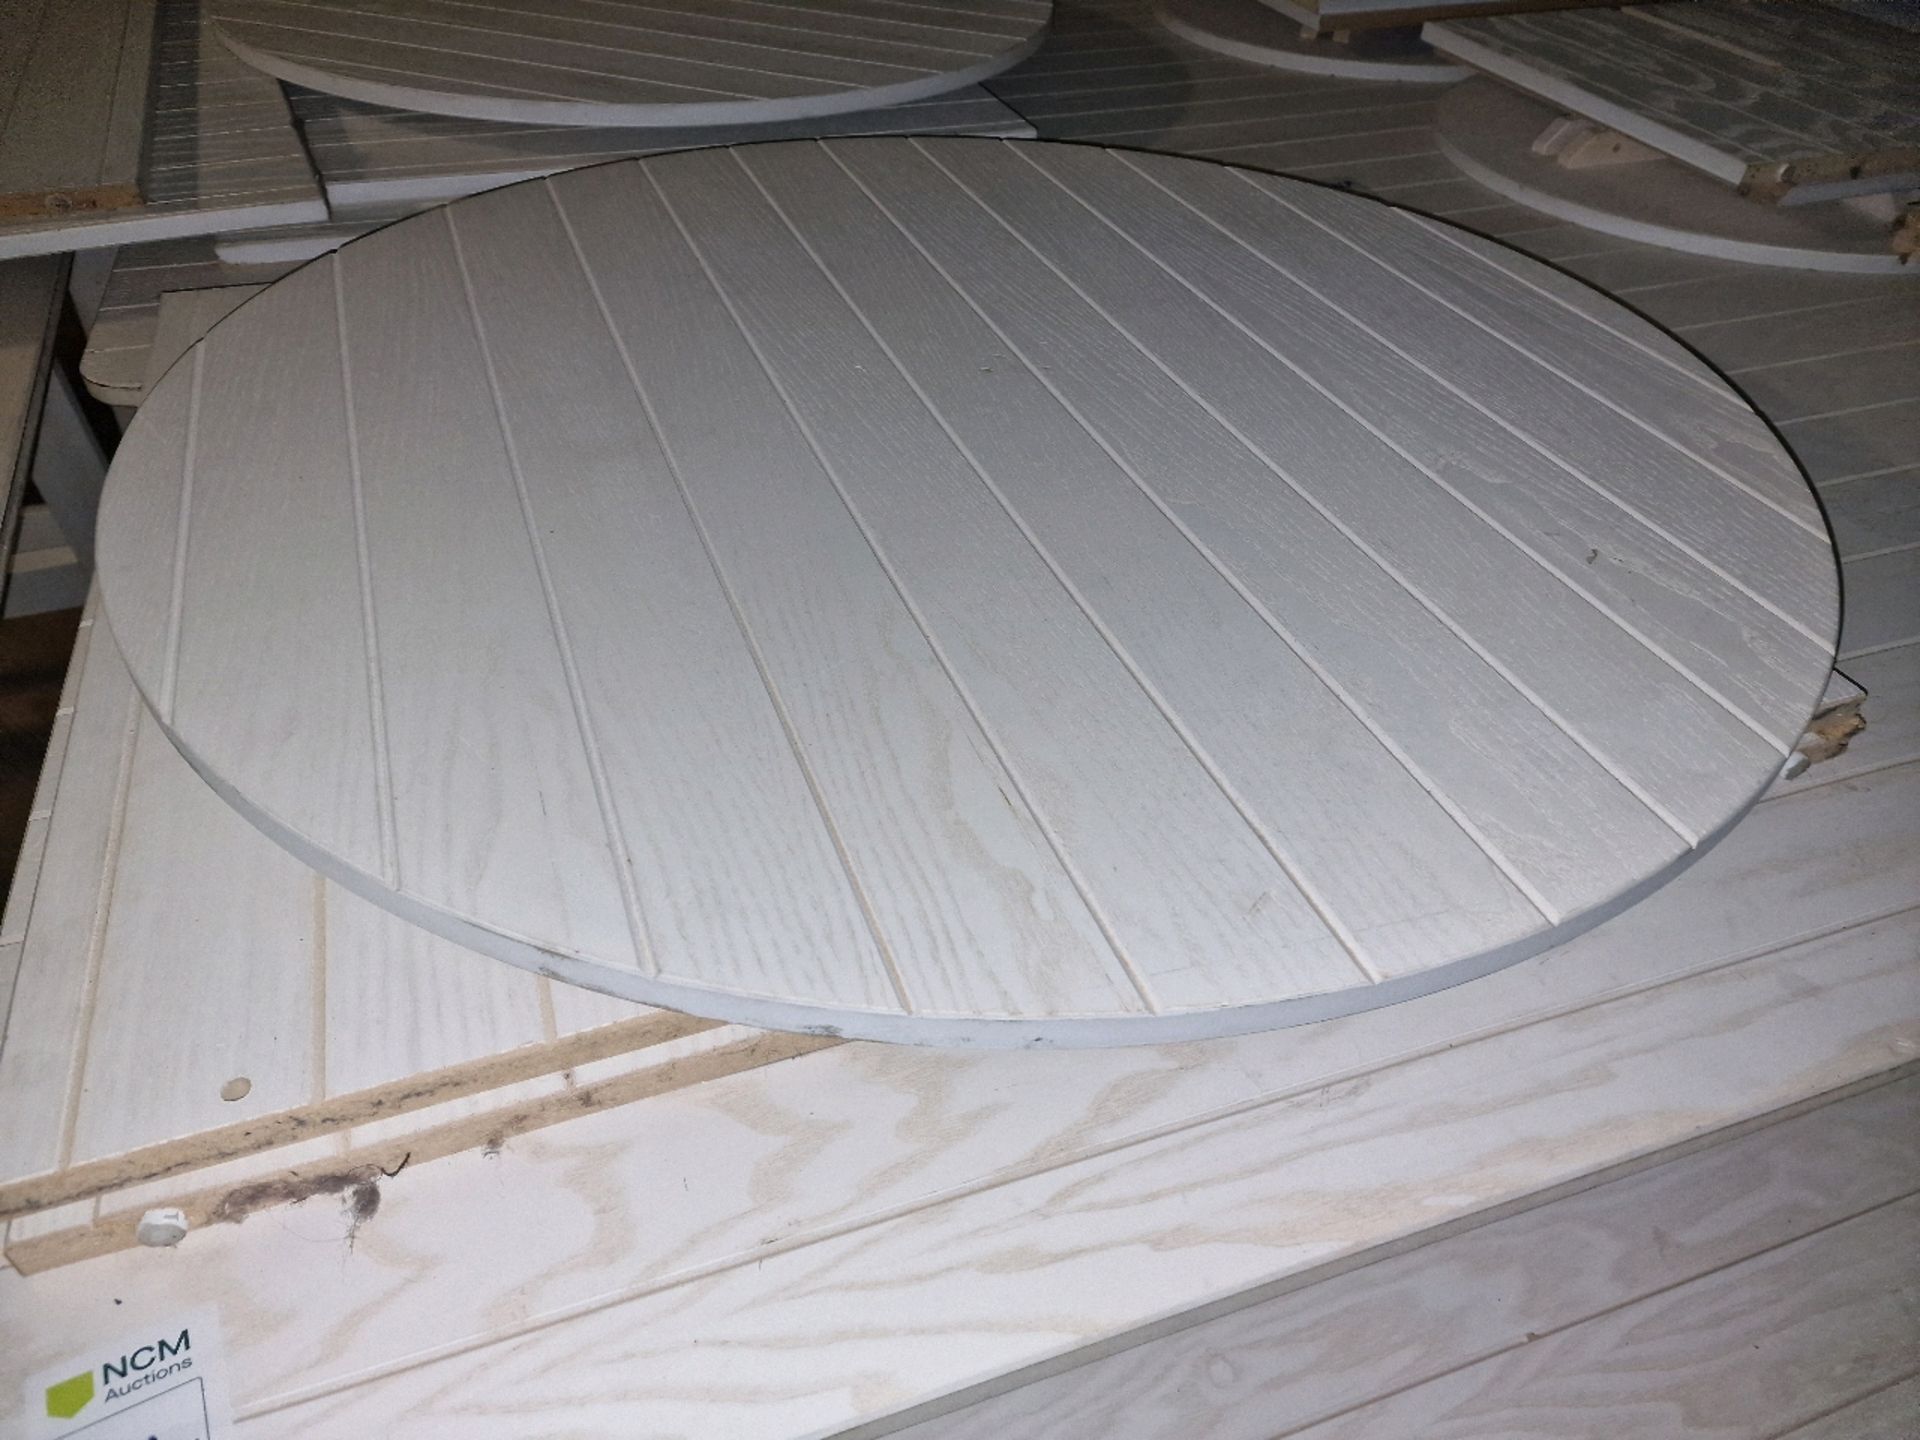 Wooden Round Slatted Table - Image 3 of 3